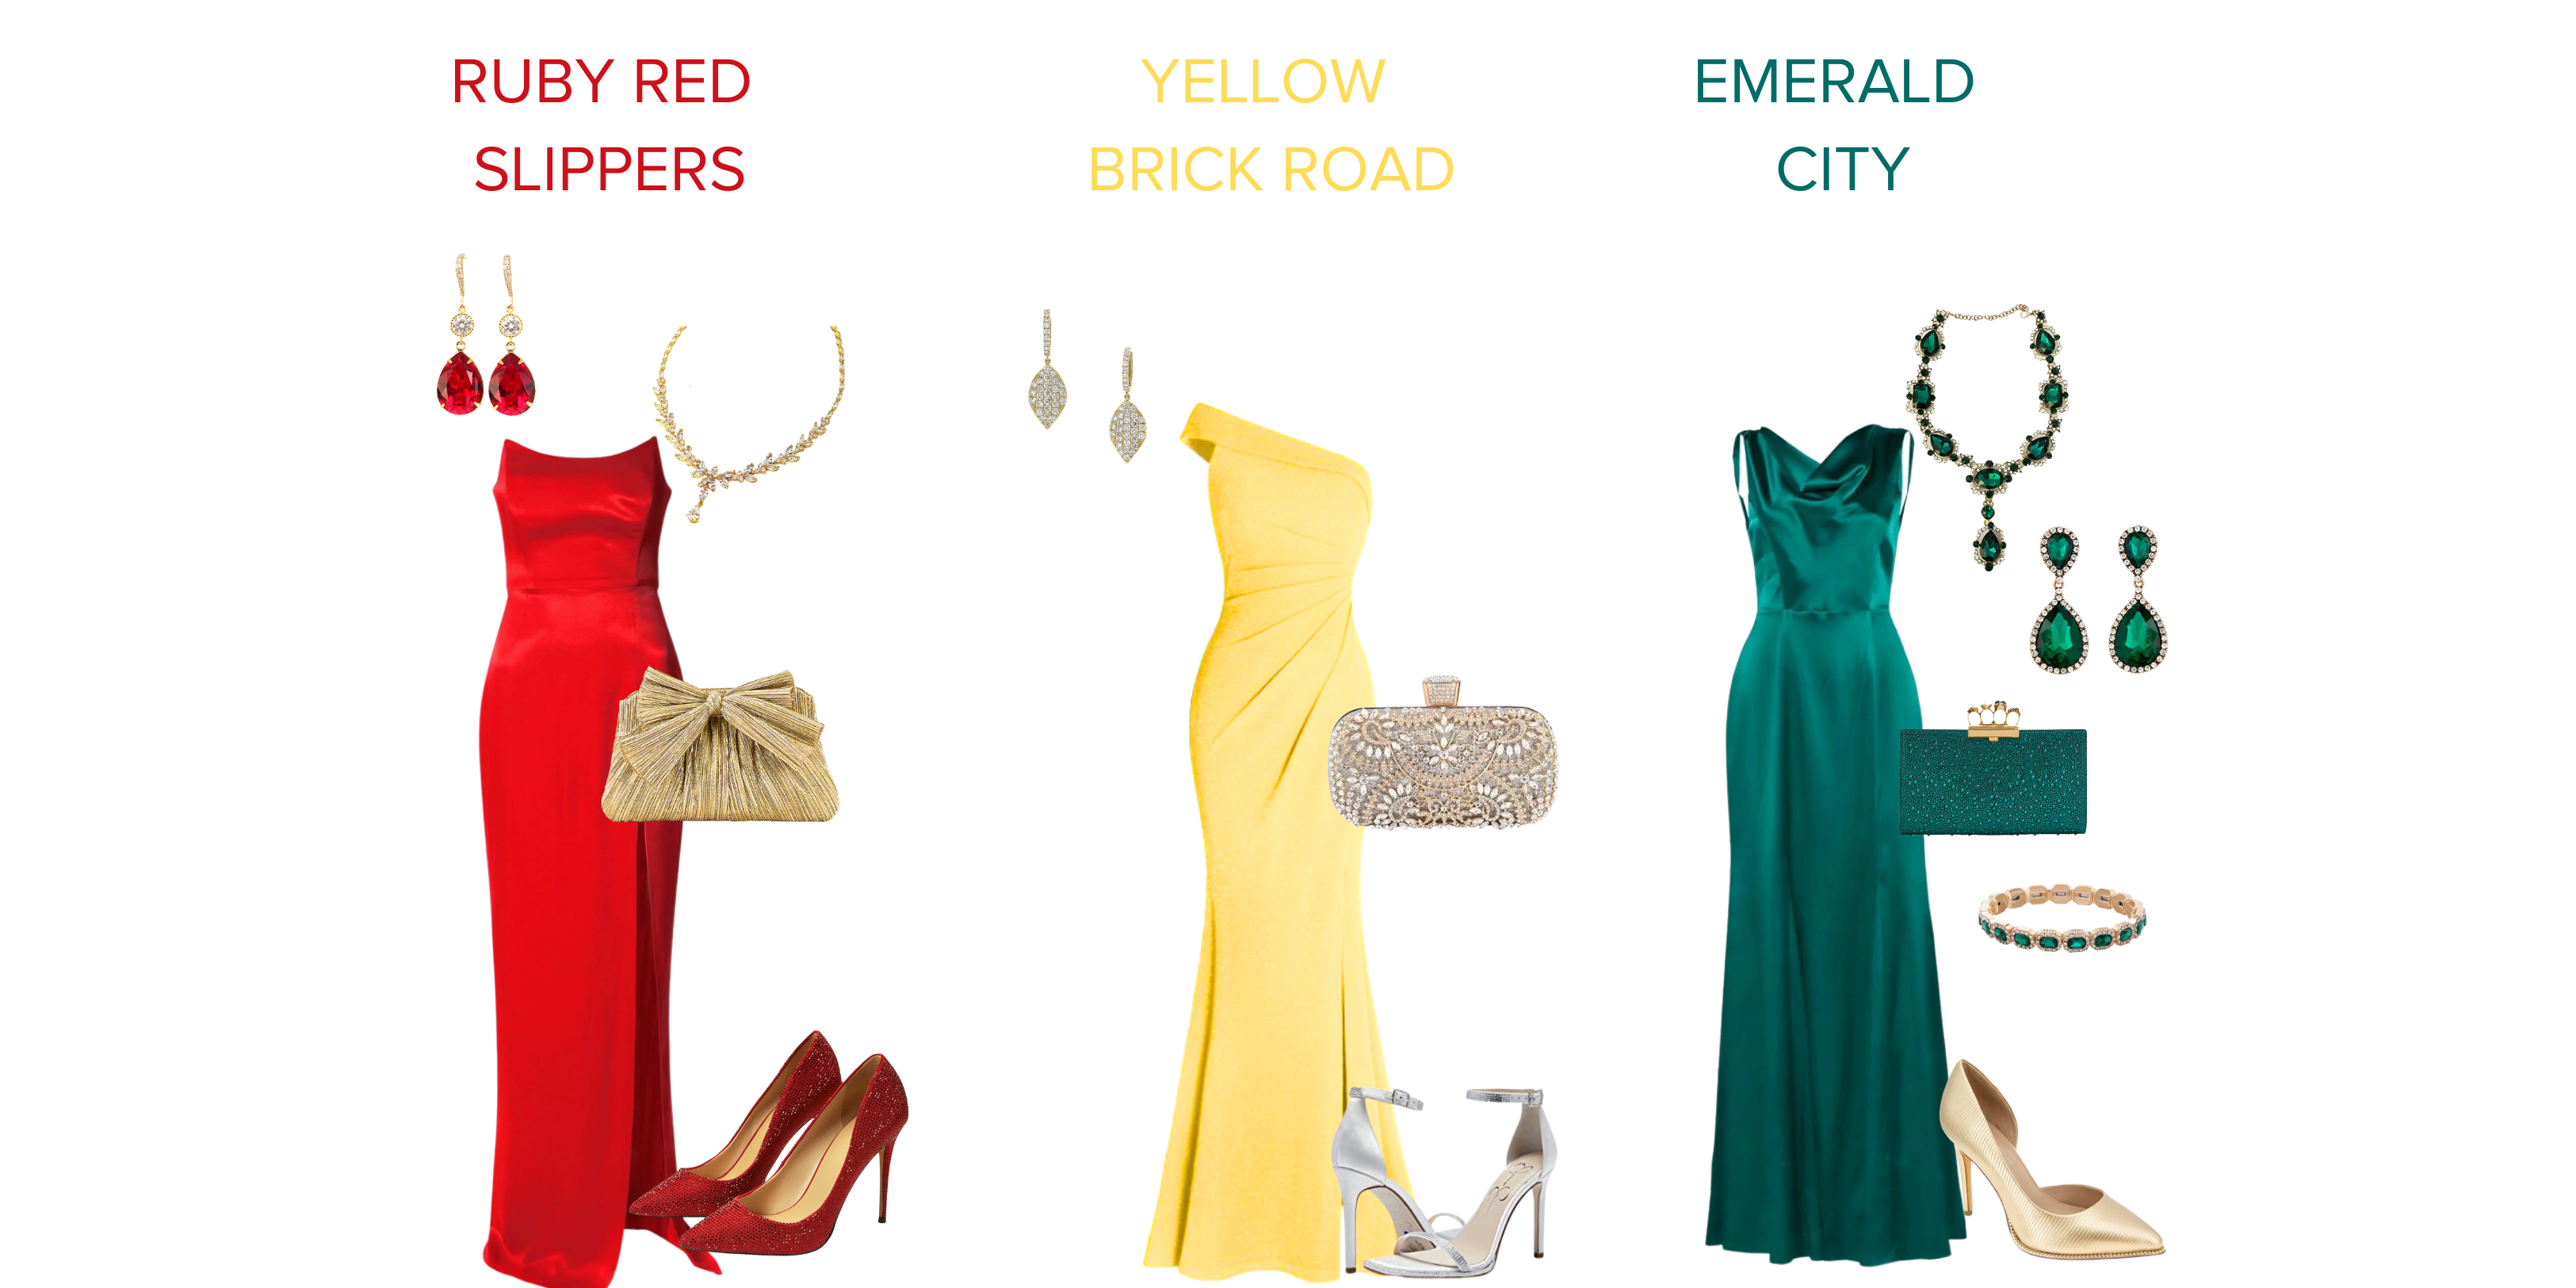 Photo of three themed outfits, a red dress, green dress and yellow dress with matching accessories